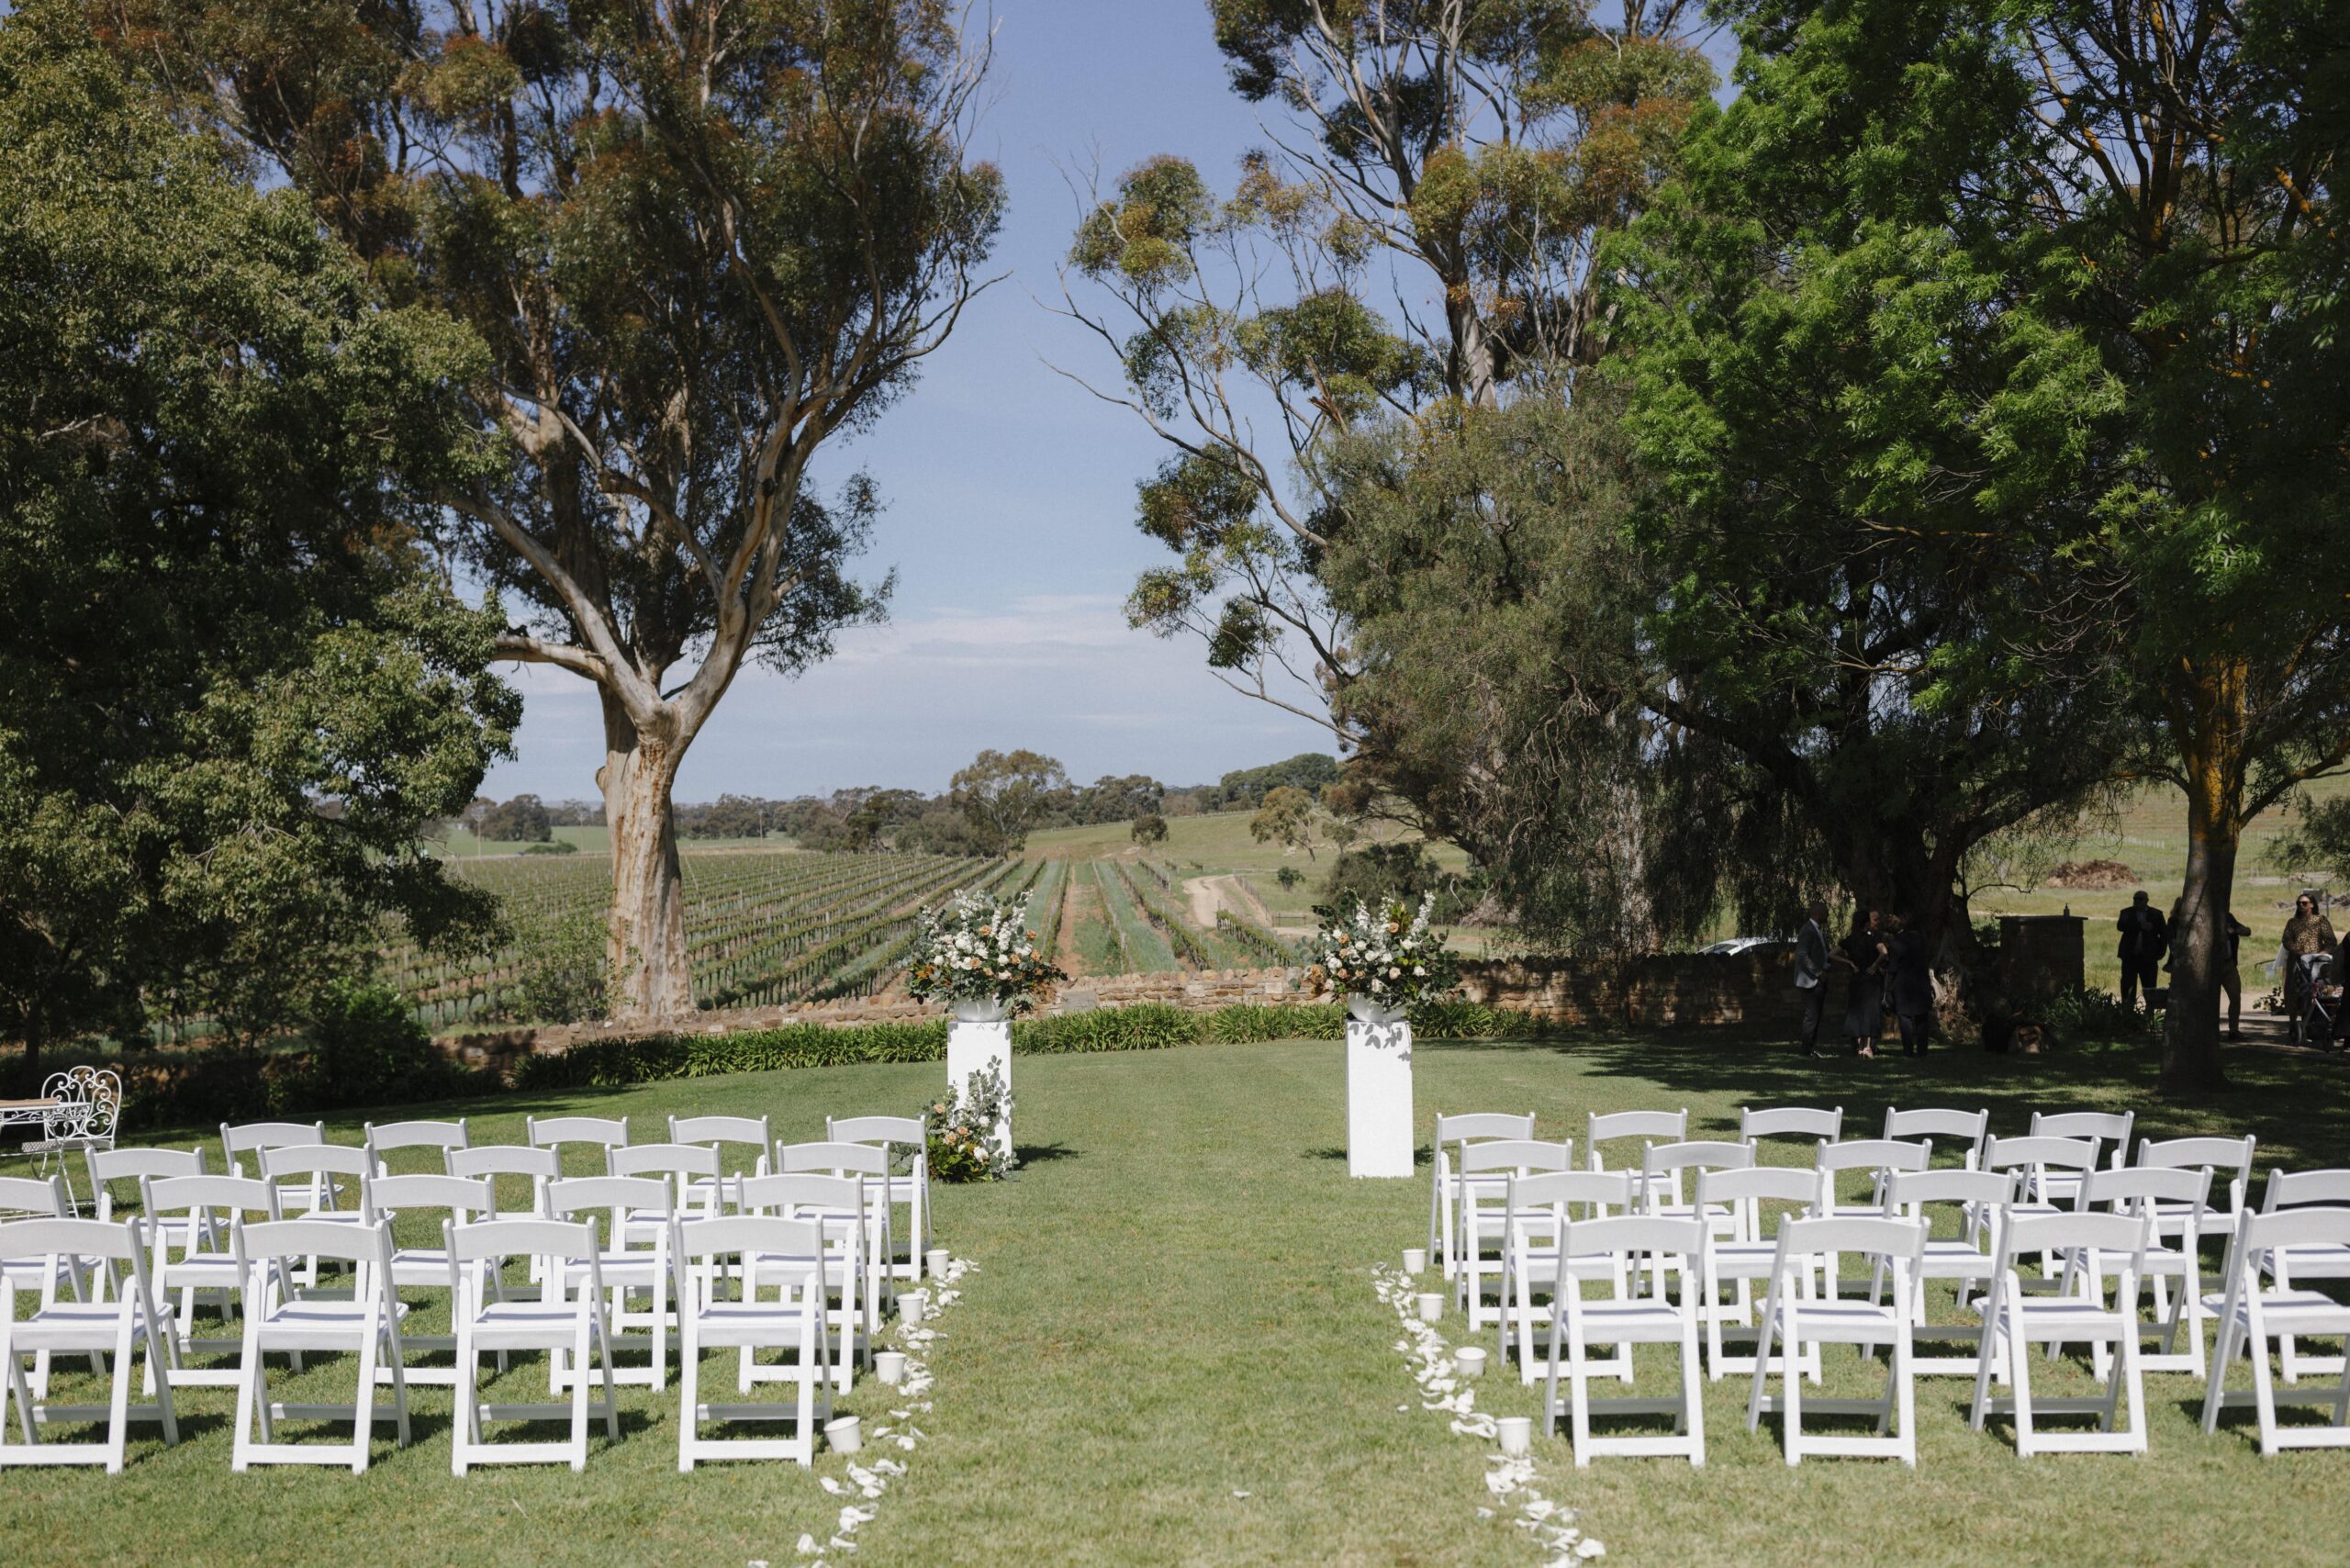 Ceremony - white chairs and white flower petals amongst green trees and vineyards